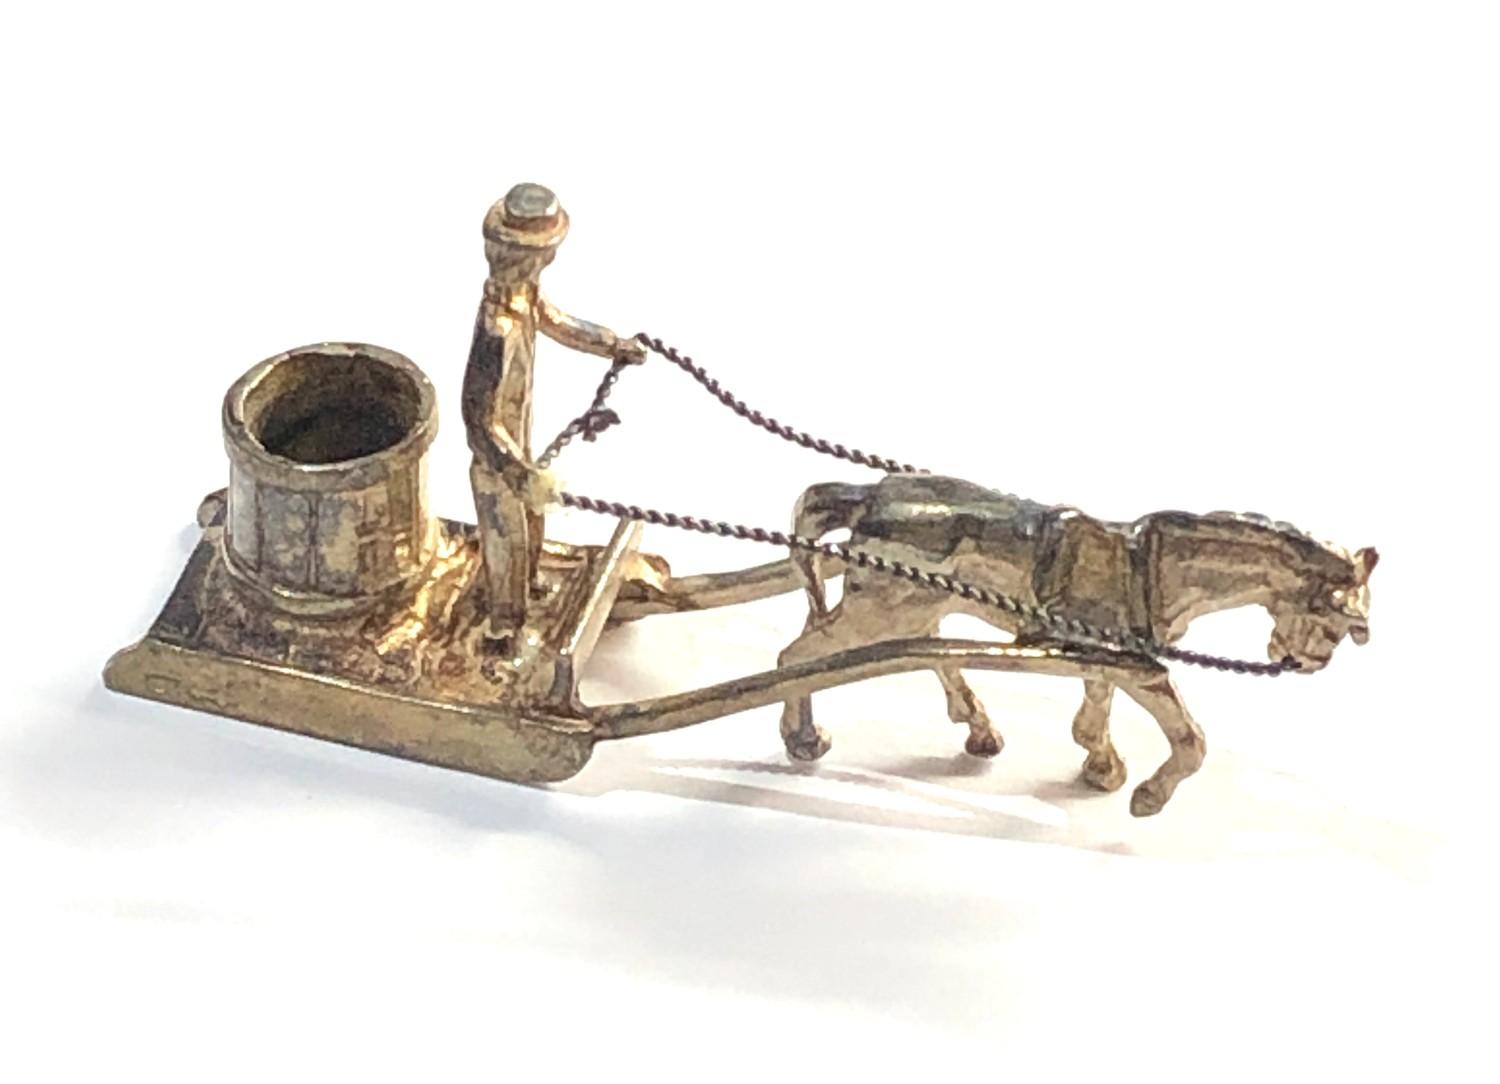 Dutch silver miniature horse drawn sledge dutch silver hallmarks please see images for details - Image 2 of 2